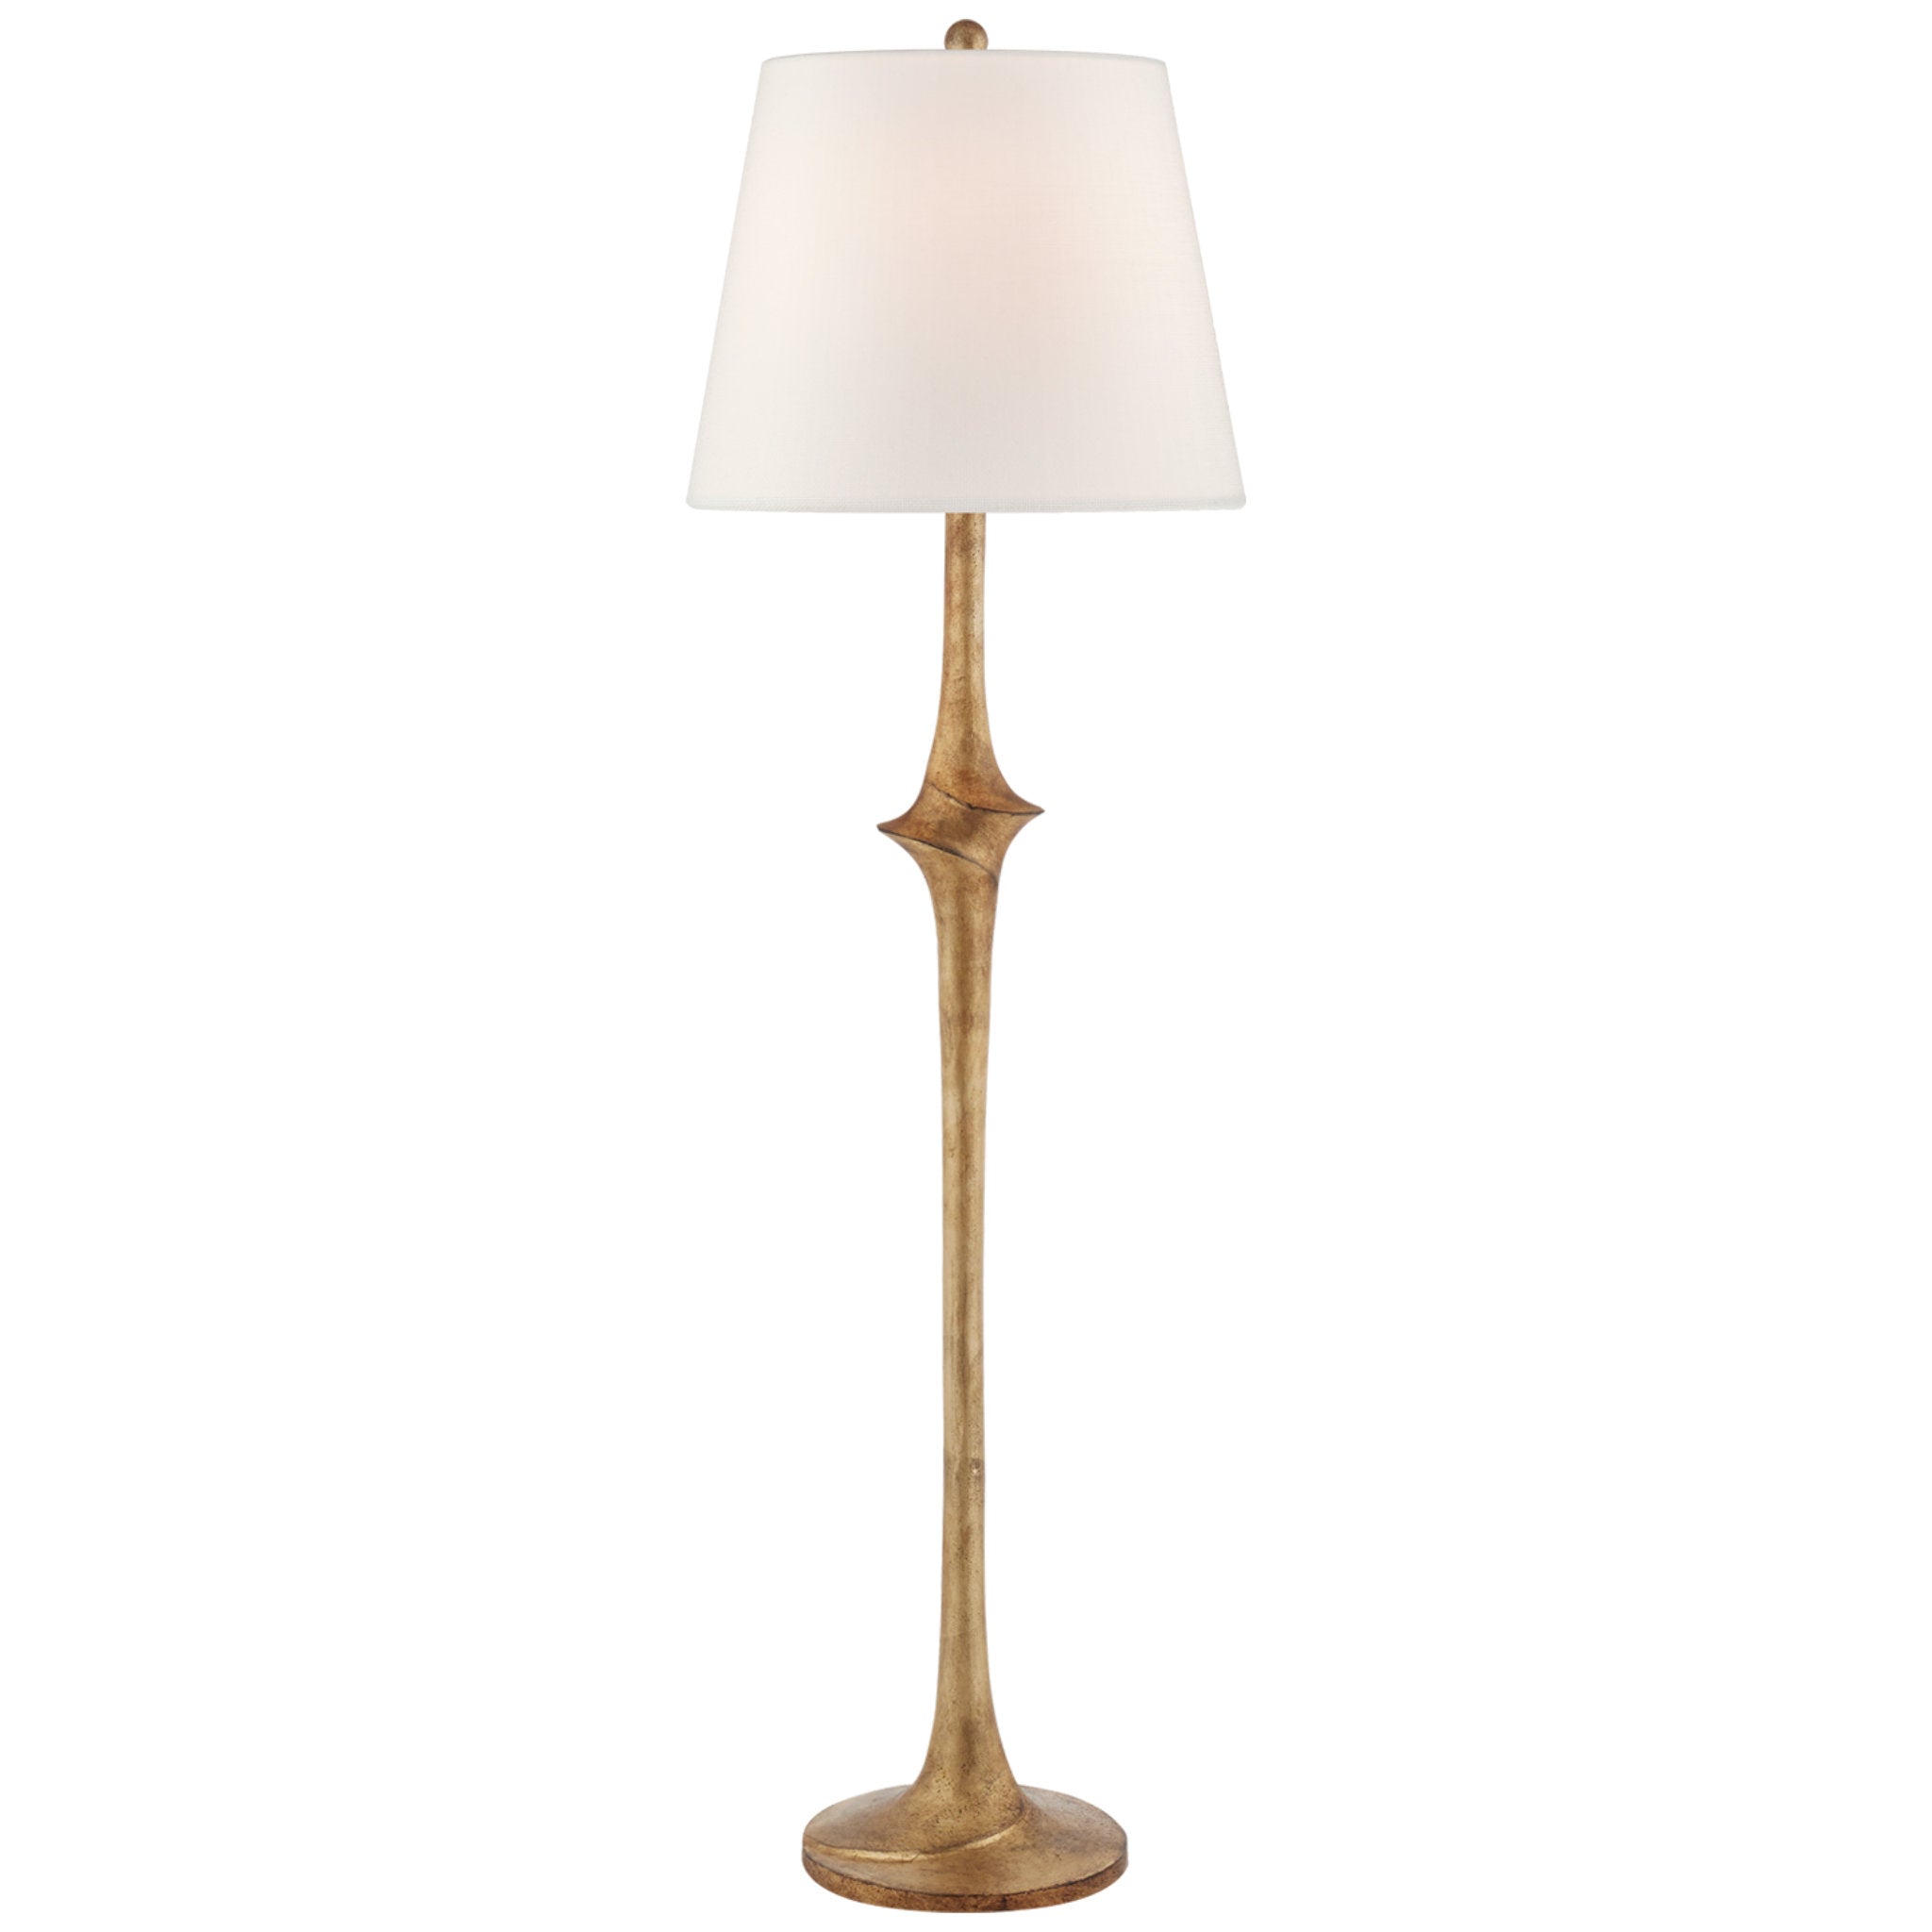 Chapman & Myers Bates Large Sculpted Floor Lamp in Gilded Iron with Linen Shade